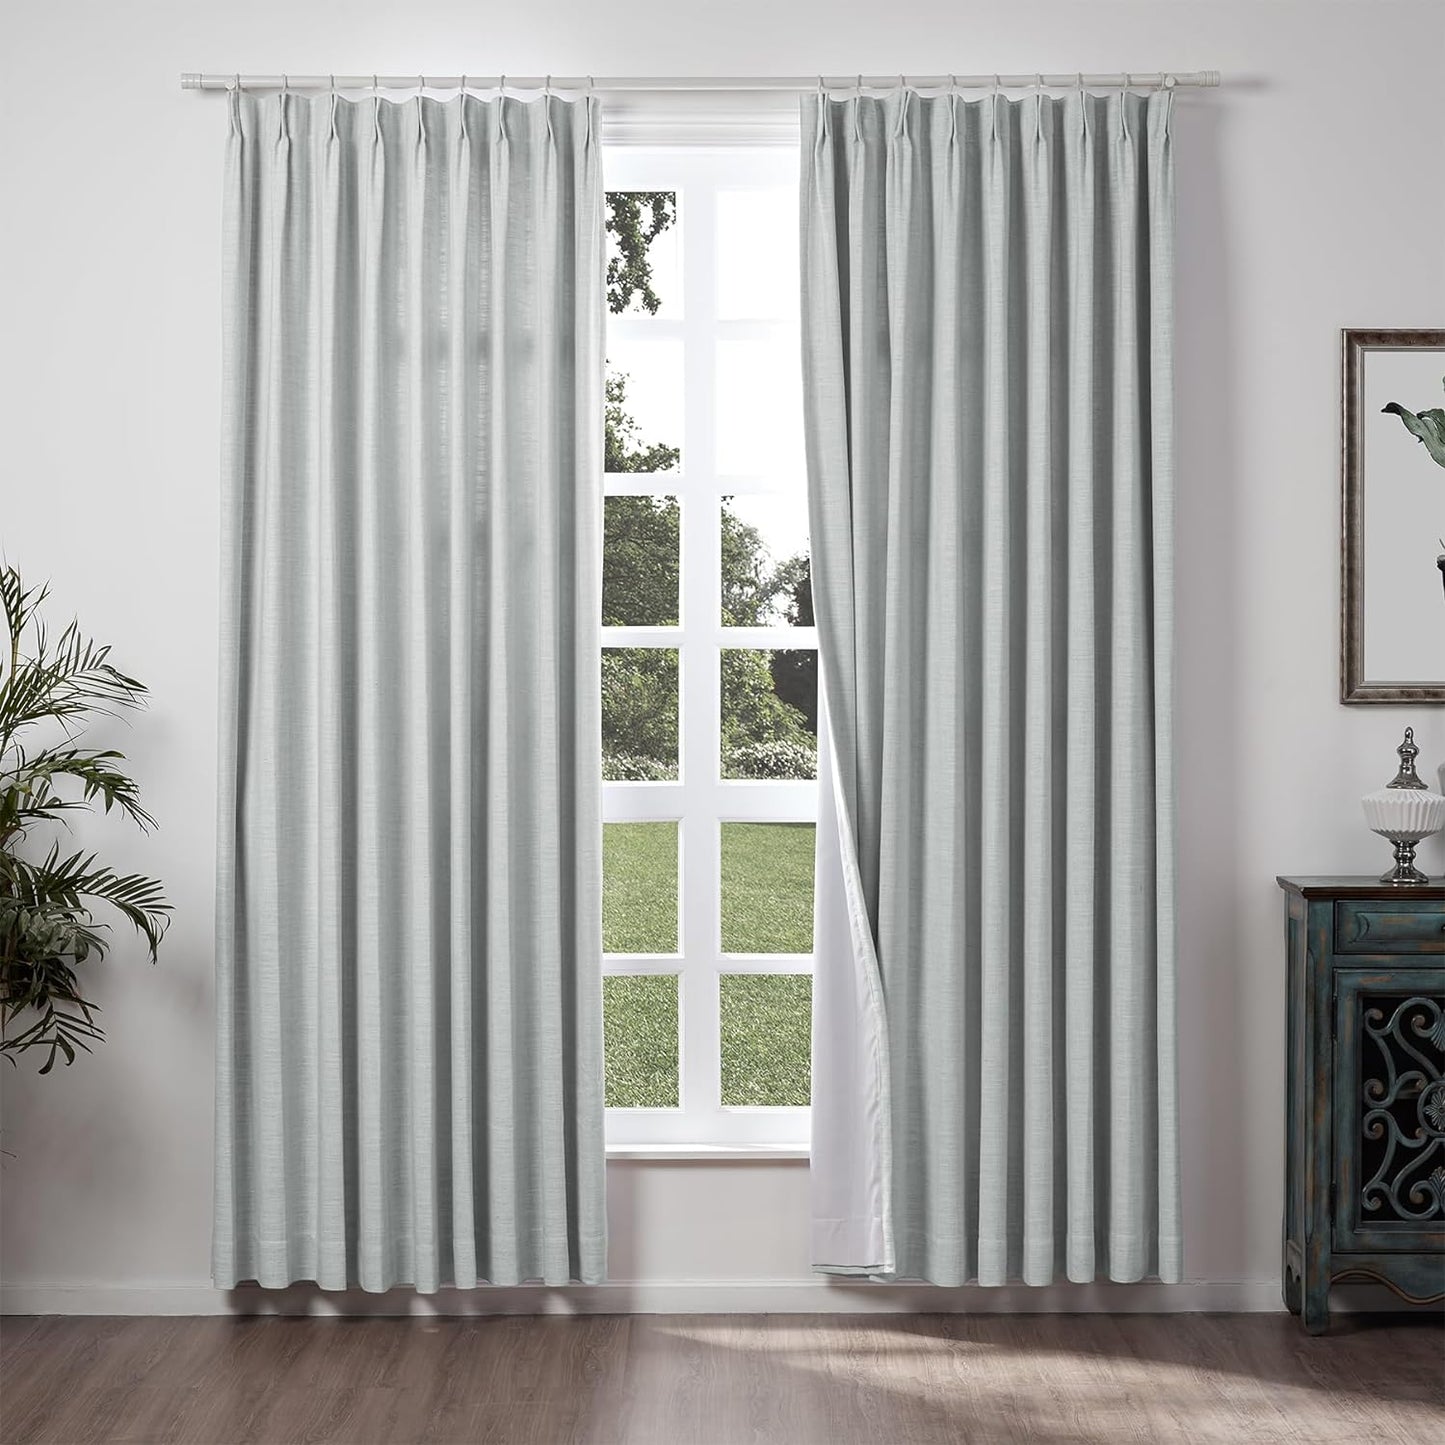 Chadmade 50" W X 84" L Polyester Linen Drape with Blackout Lining Pinch Pleat Curtain for Sliding Door Patio Door Living Room Bedroom, (1 Panel) Beige White Liz Collection  ChadMade Fog (18) 50Wx63L 